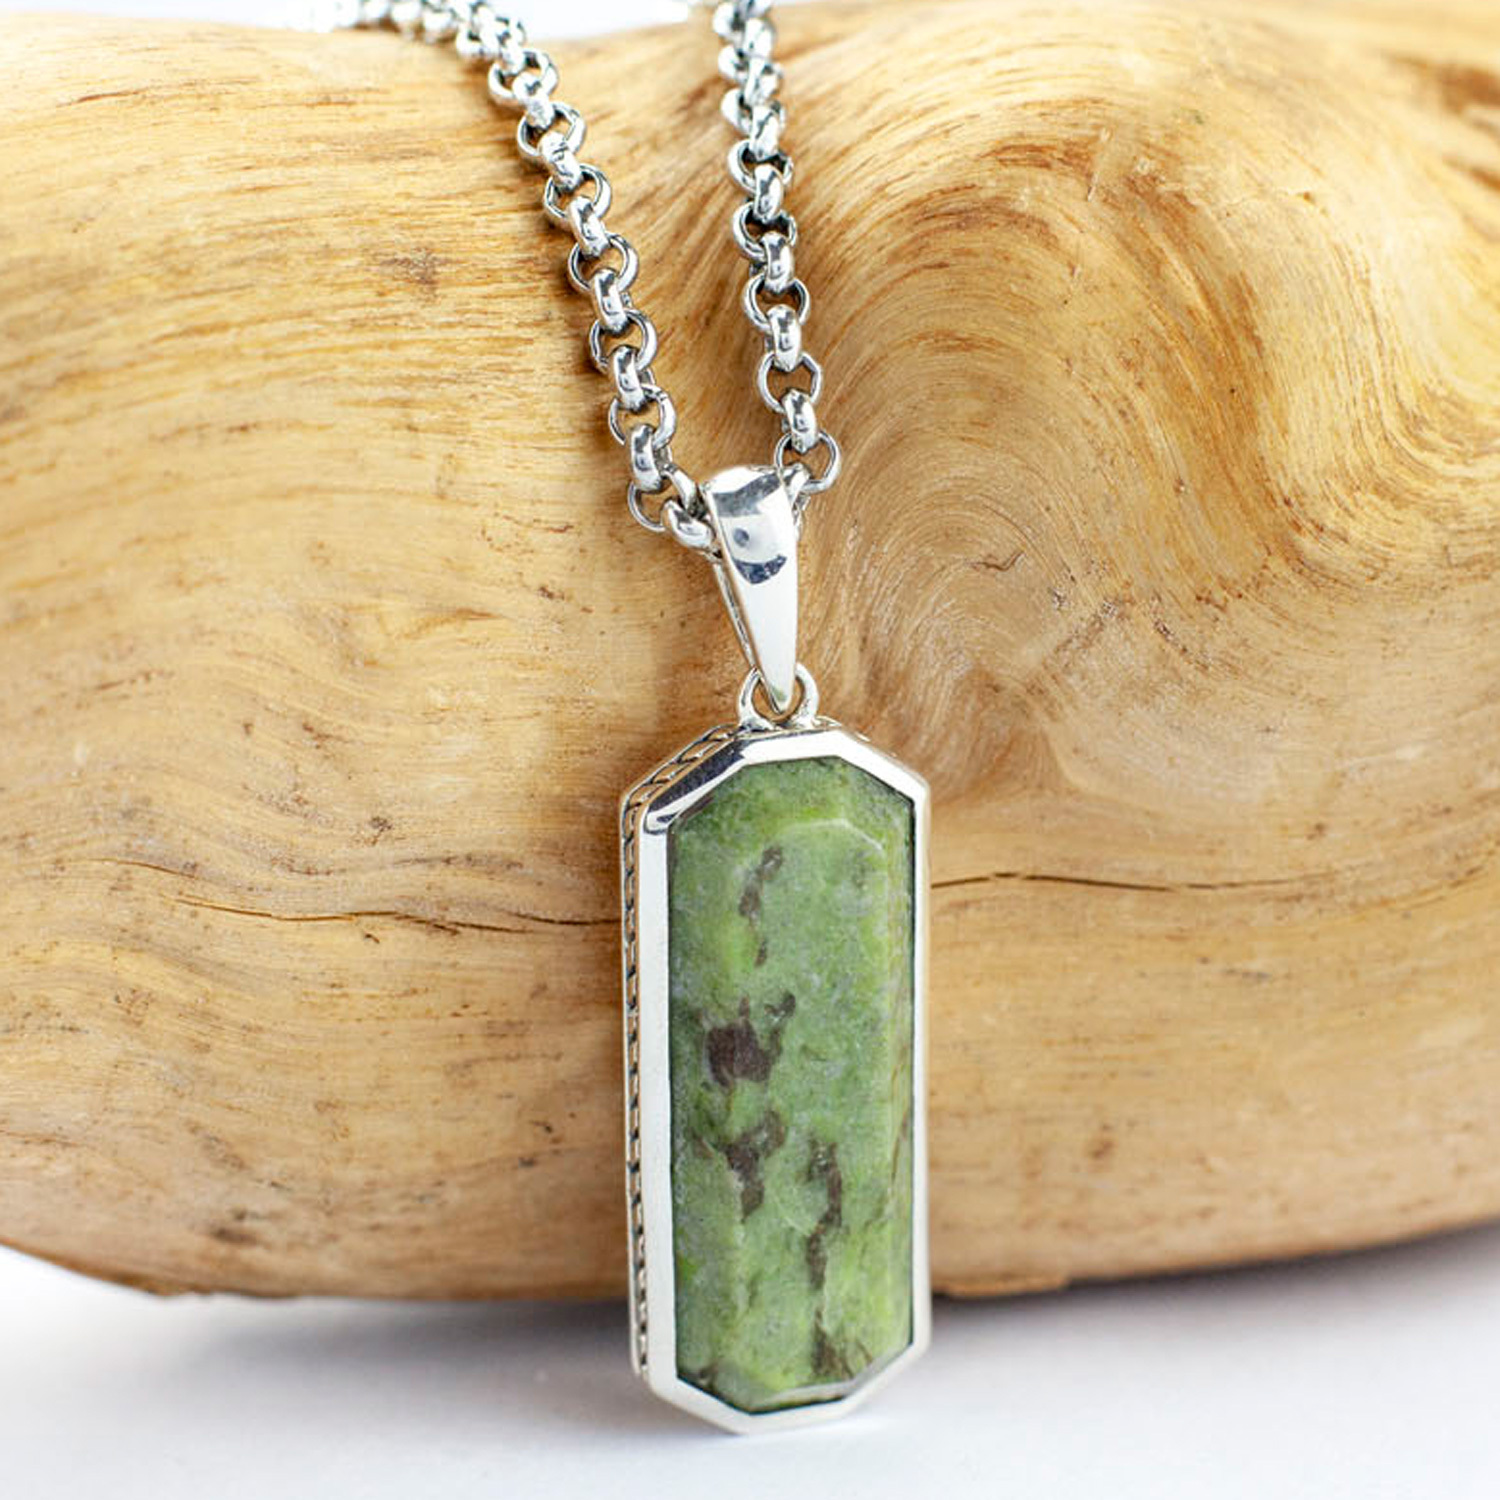 Light Green Details about   Irish Connemara Marble Necklace w/Silver Plate Chain 